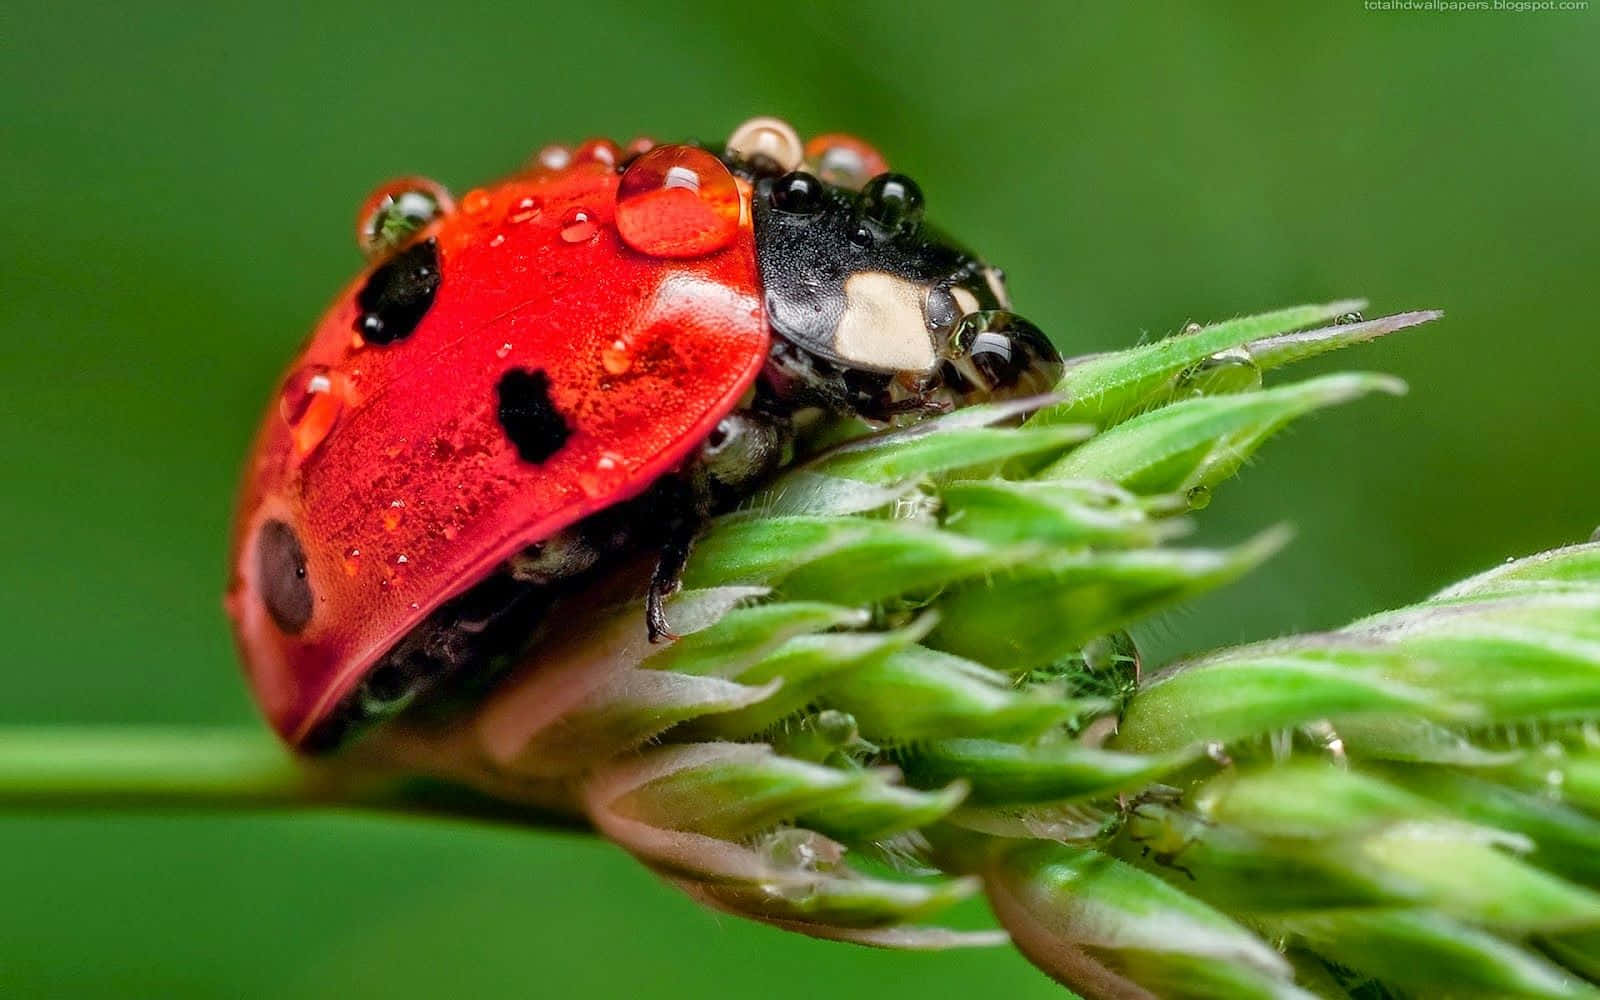 A ladybug spotted outdoors amongst nature.